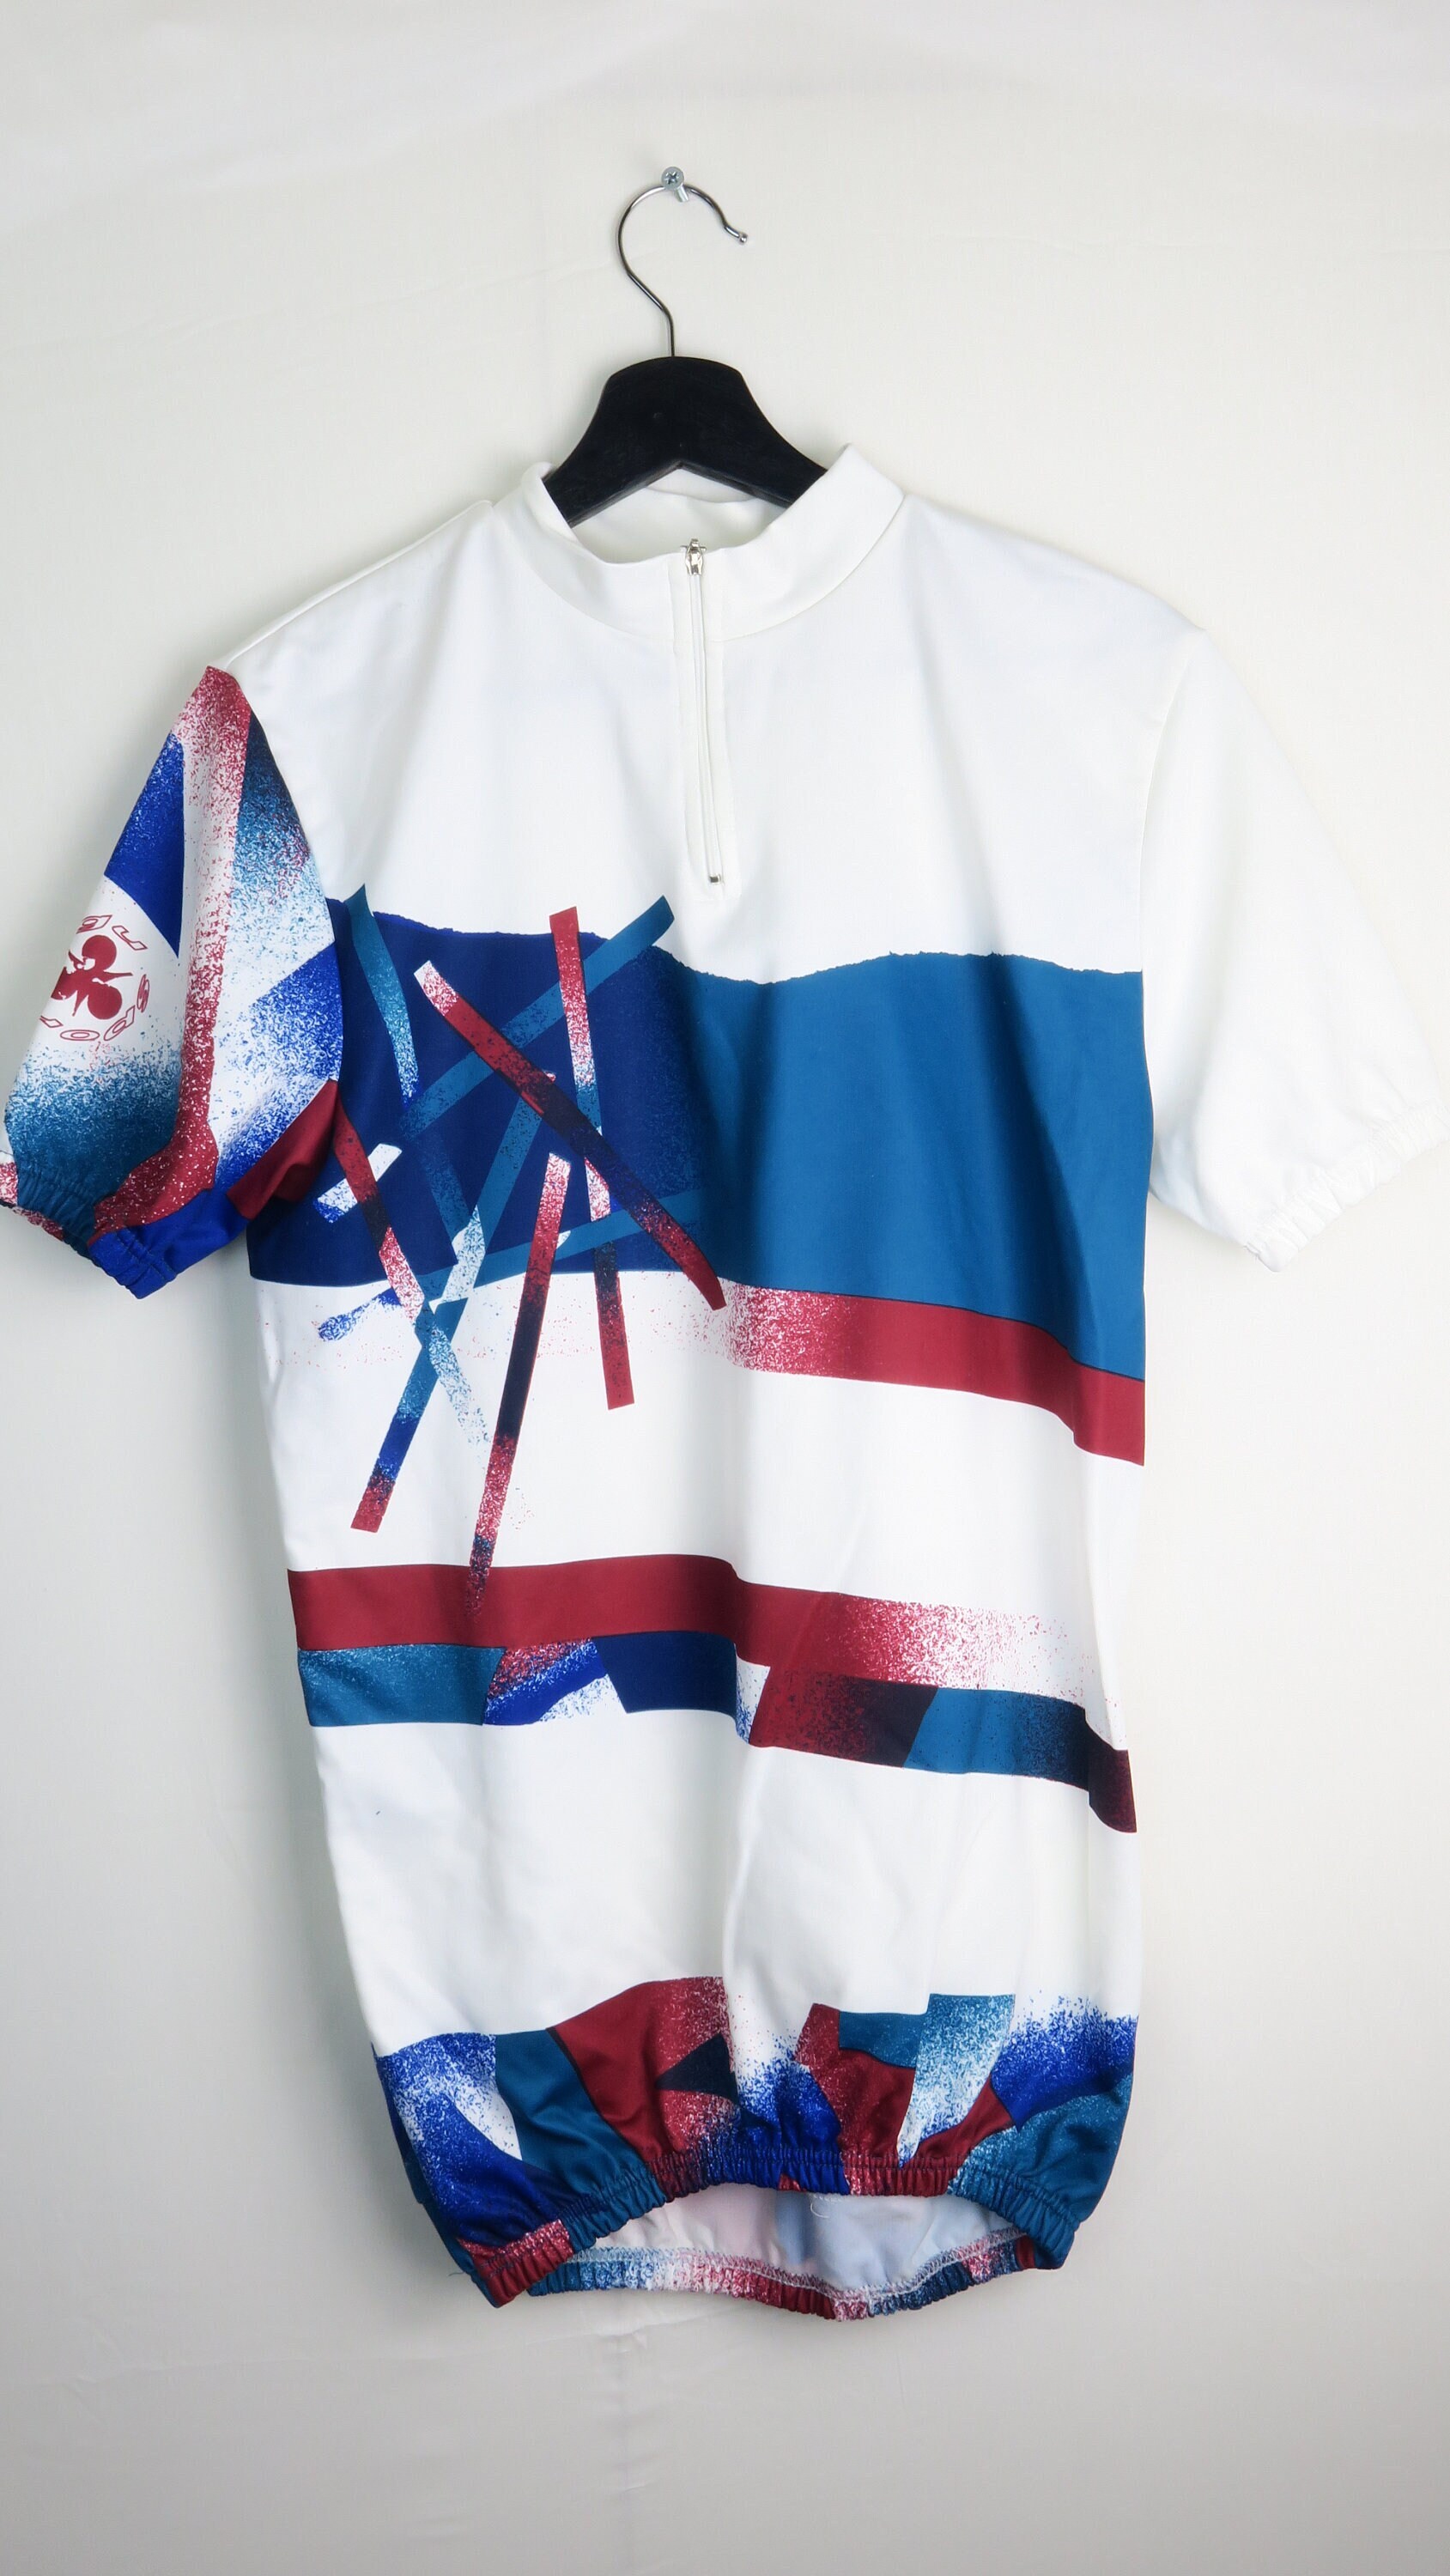 Retro cycling jersey with abstract shapes